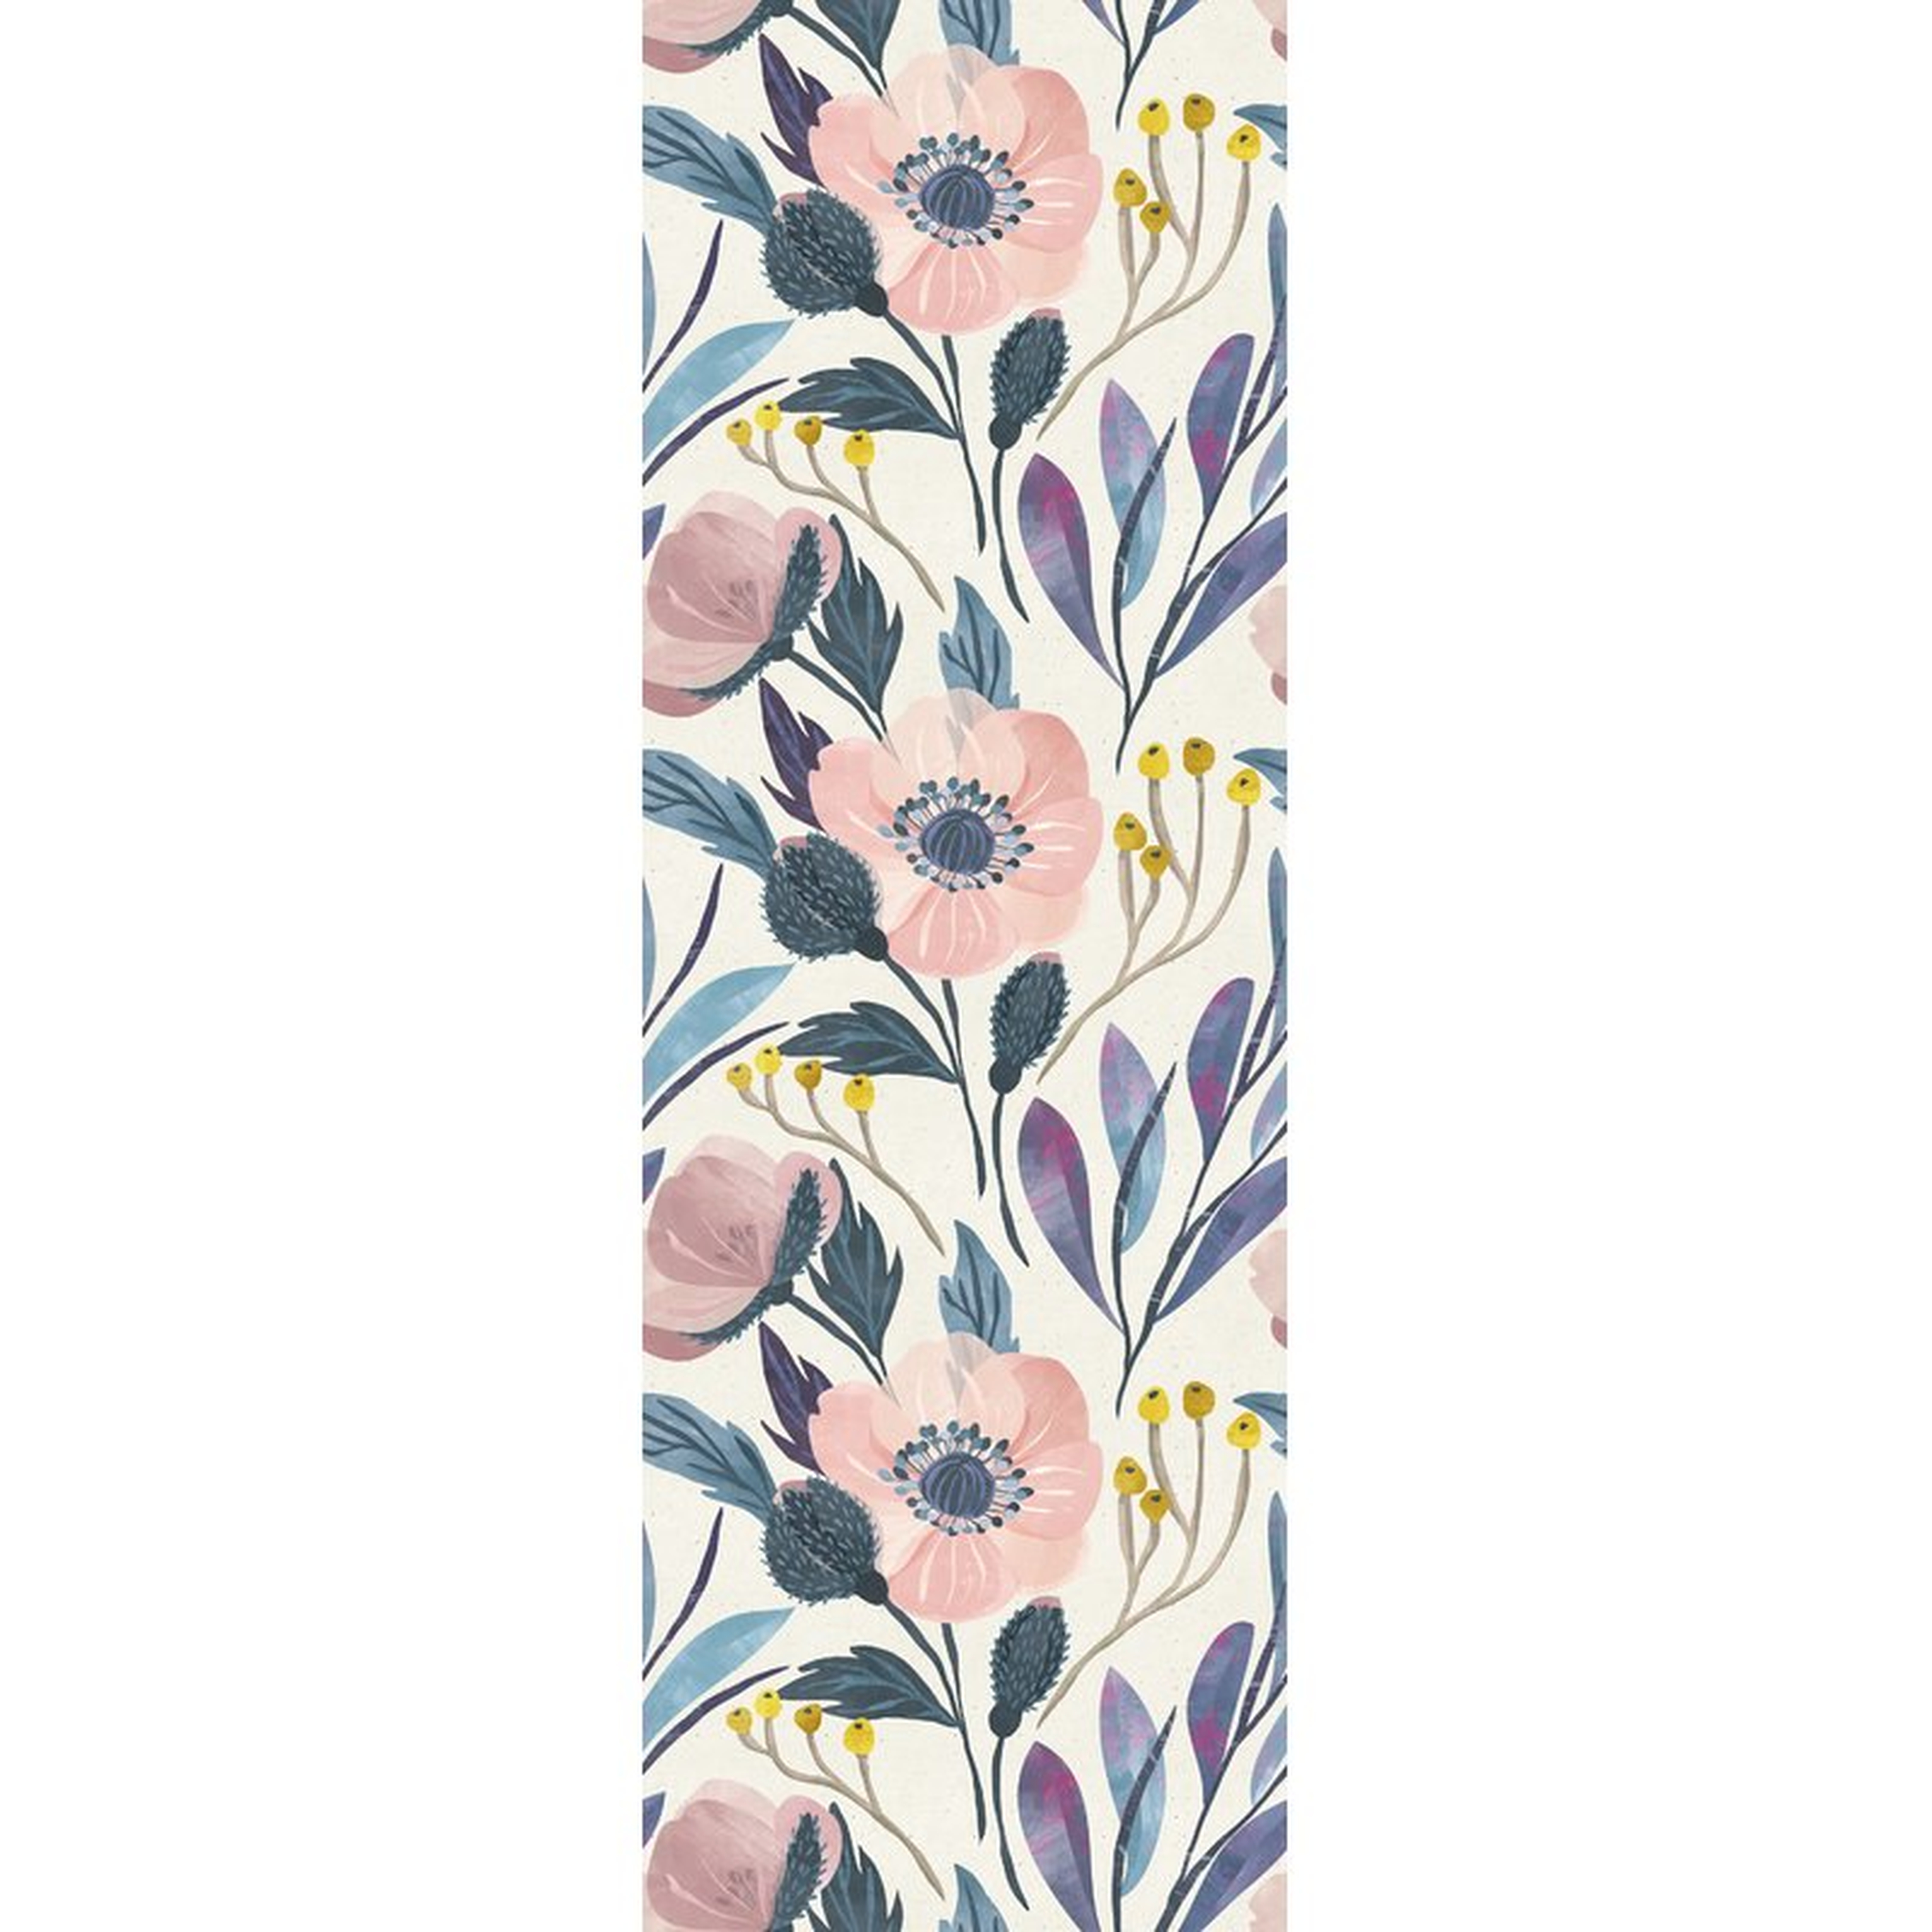 Miley Removable Nursery Vintage 8.33' L x 100" W Peel and Stick Wallpaper Roll - Wayfair